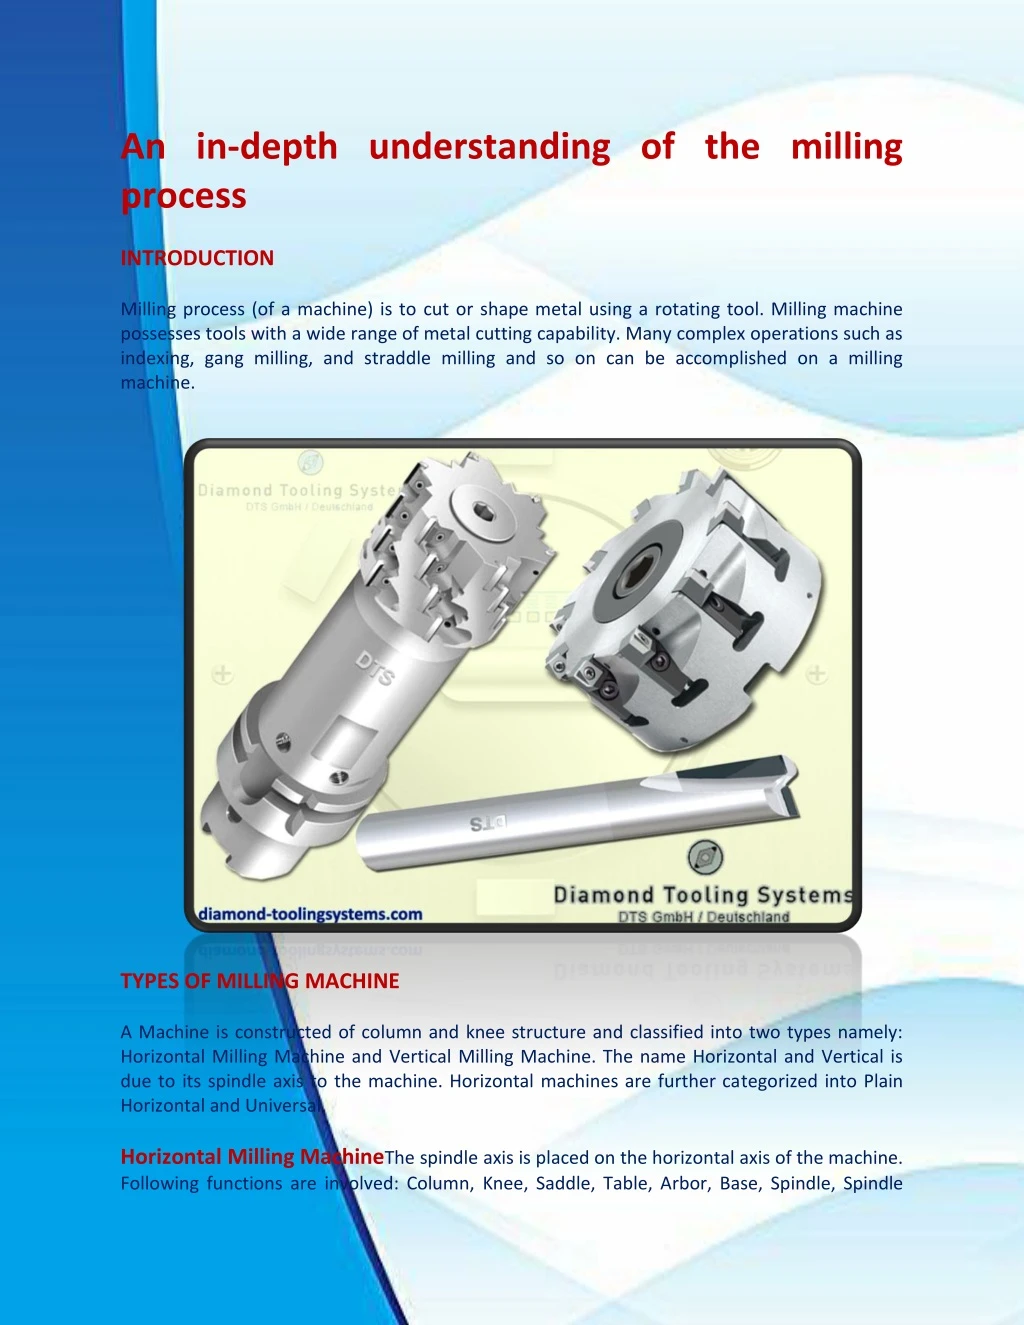 an in depth understanding of the milling process